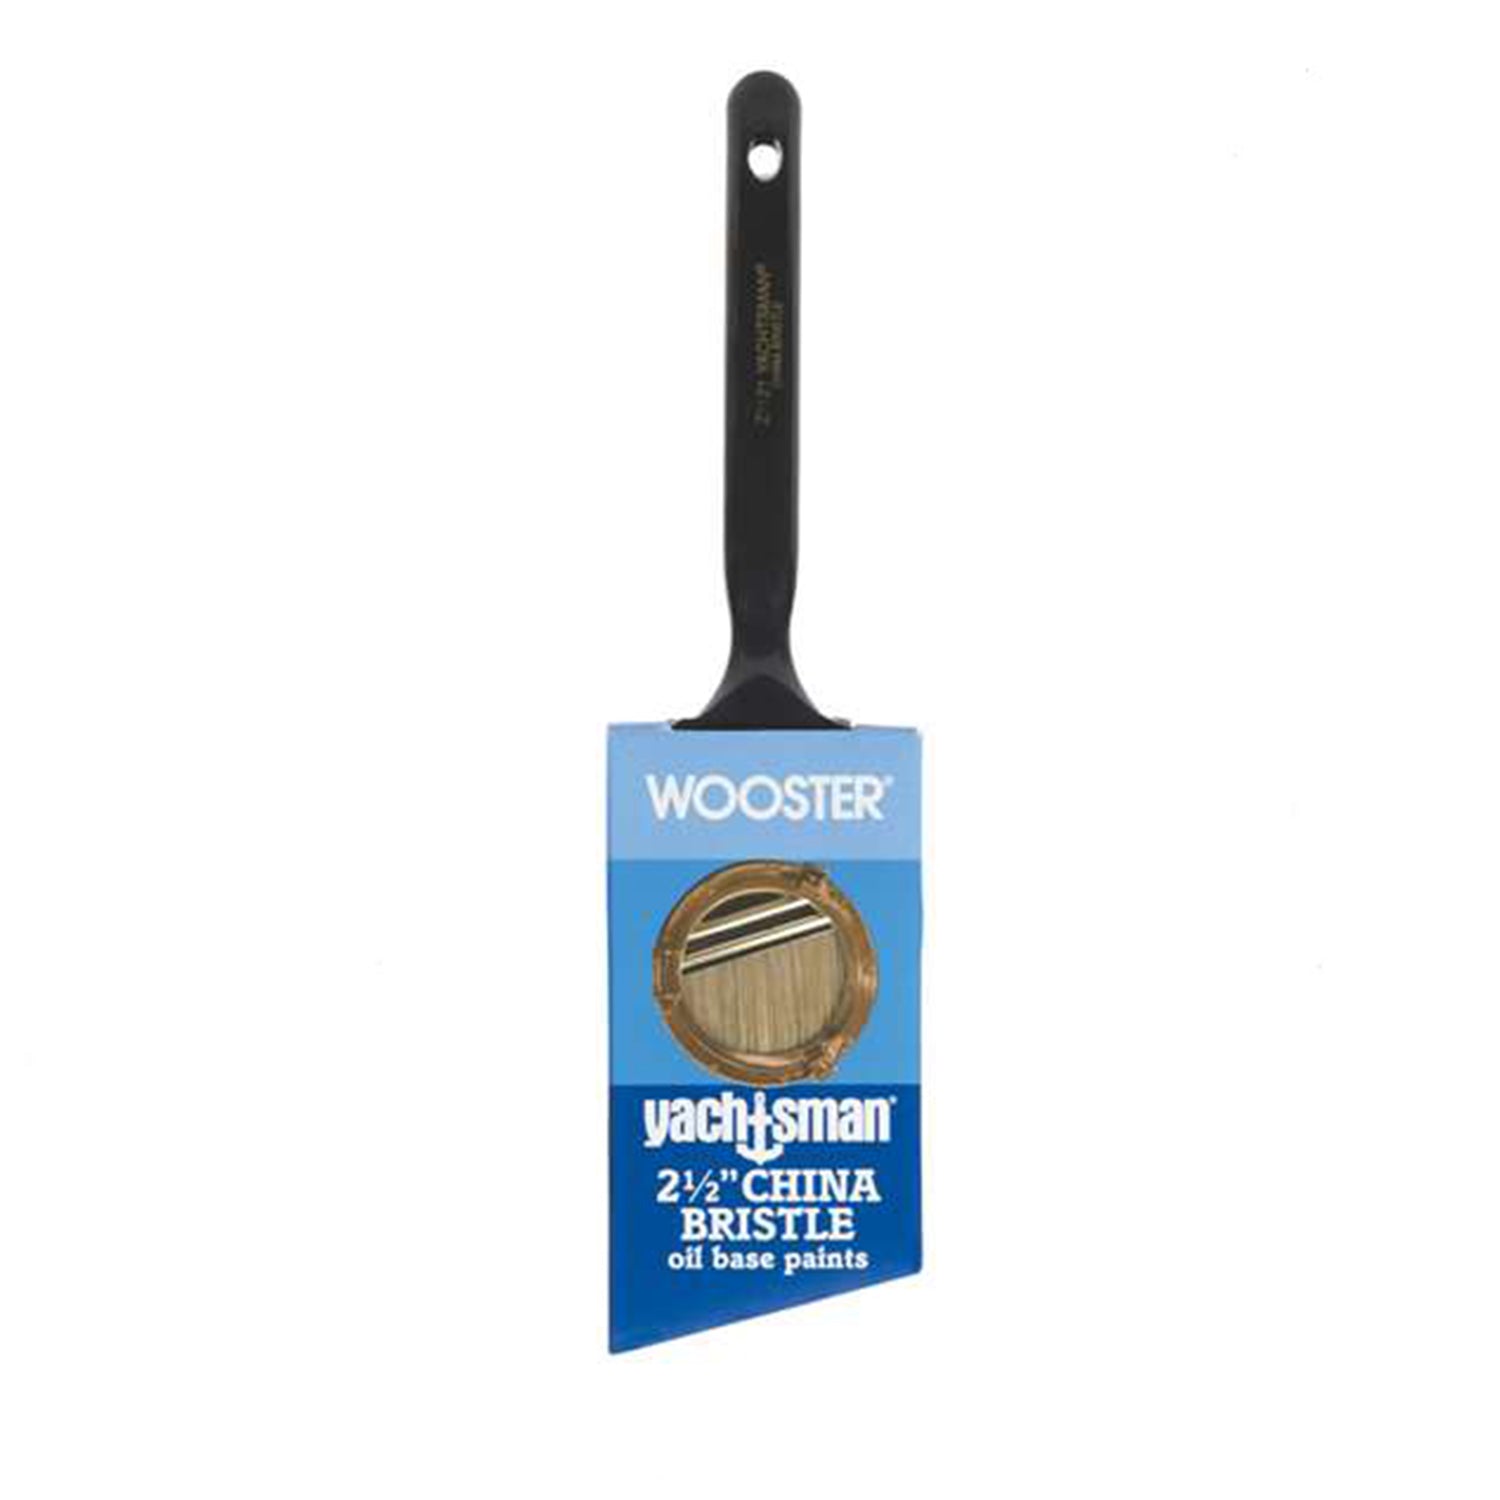 Wooster Yachtsman Brush, available at Clement's Paint in Austin, TX. 